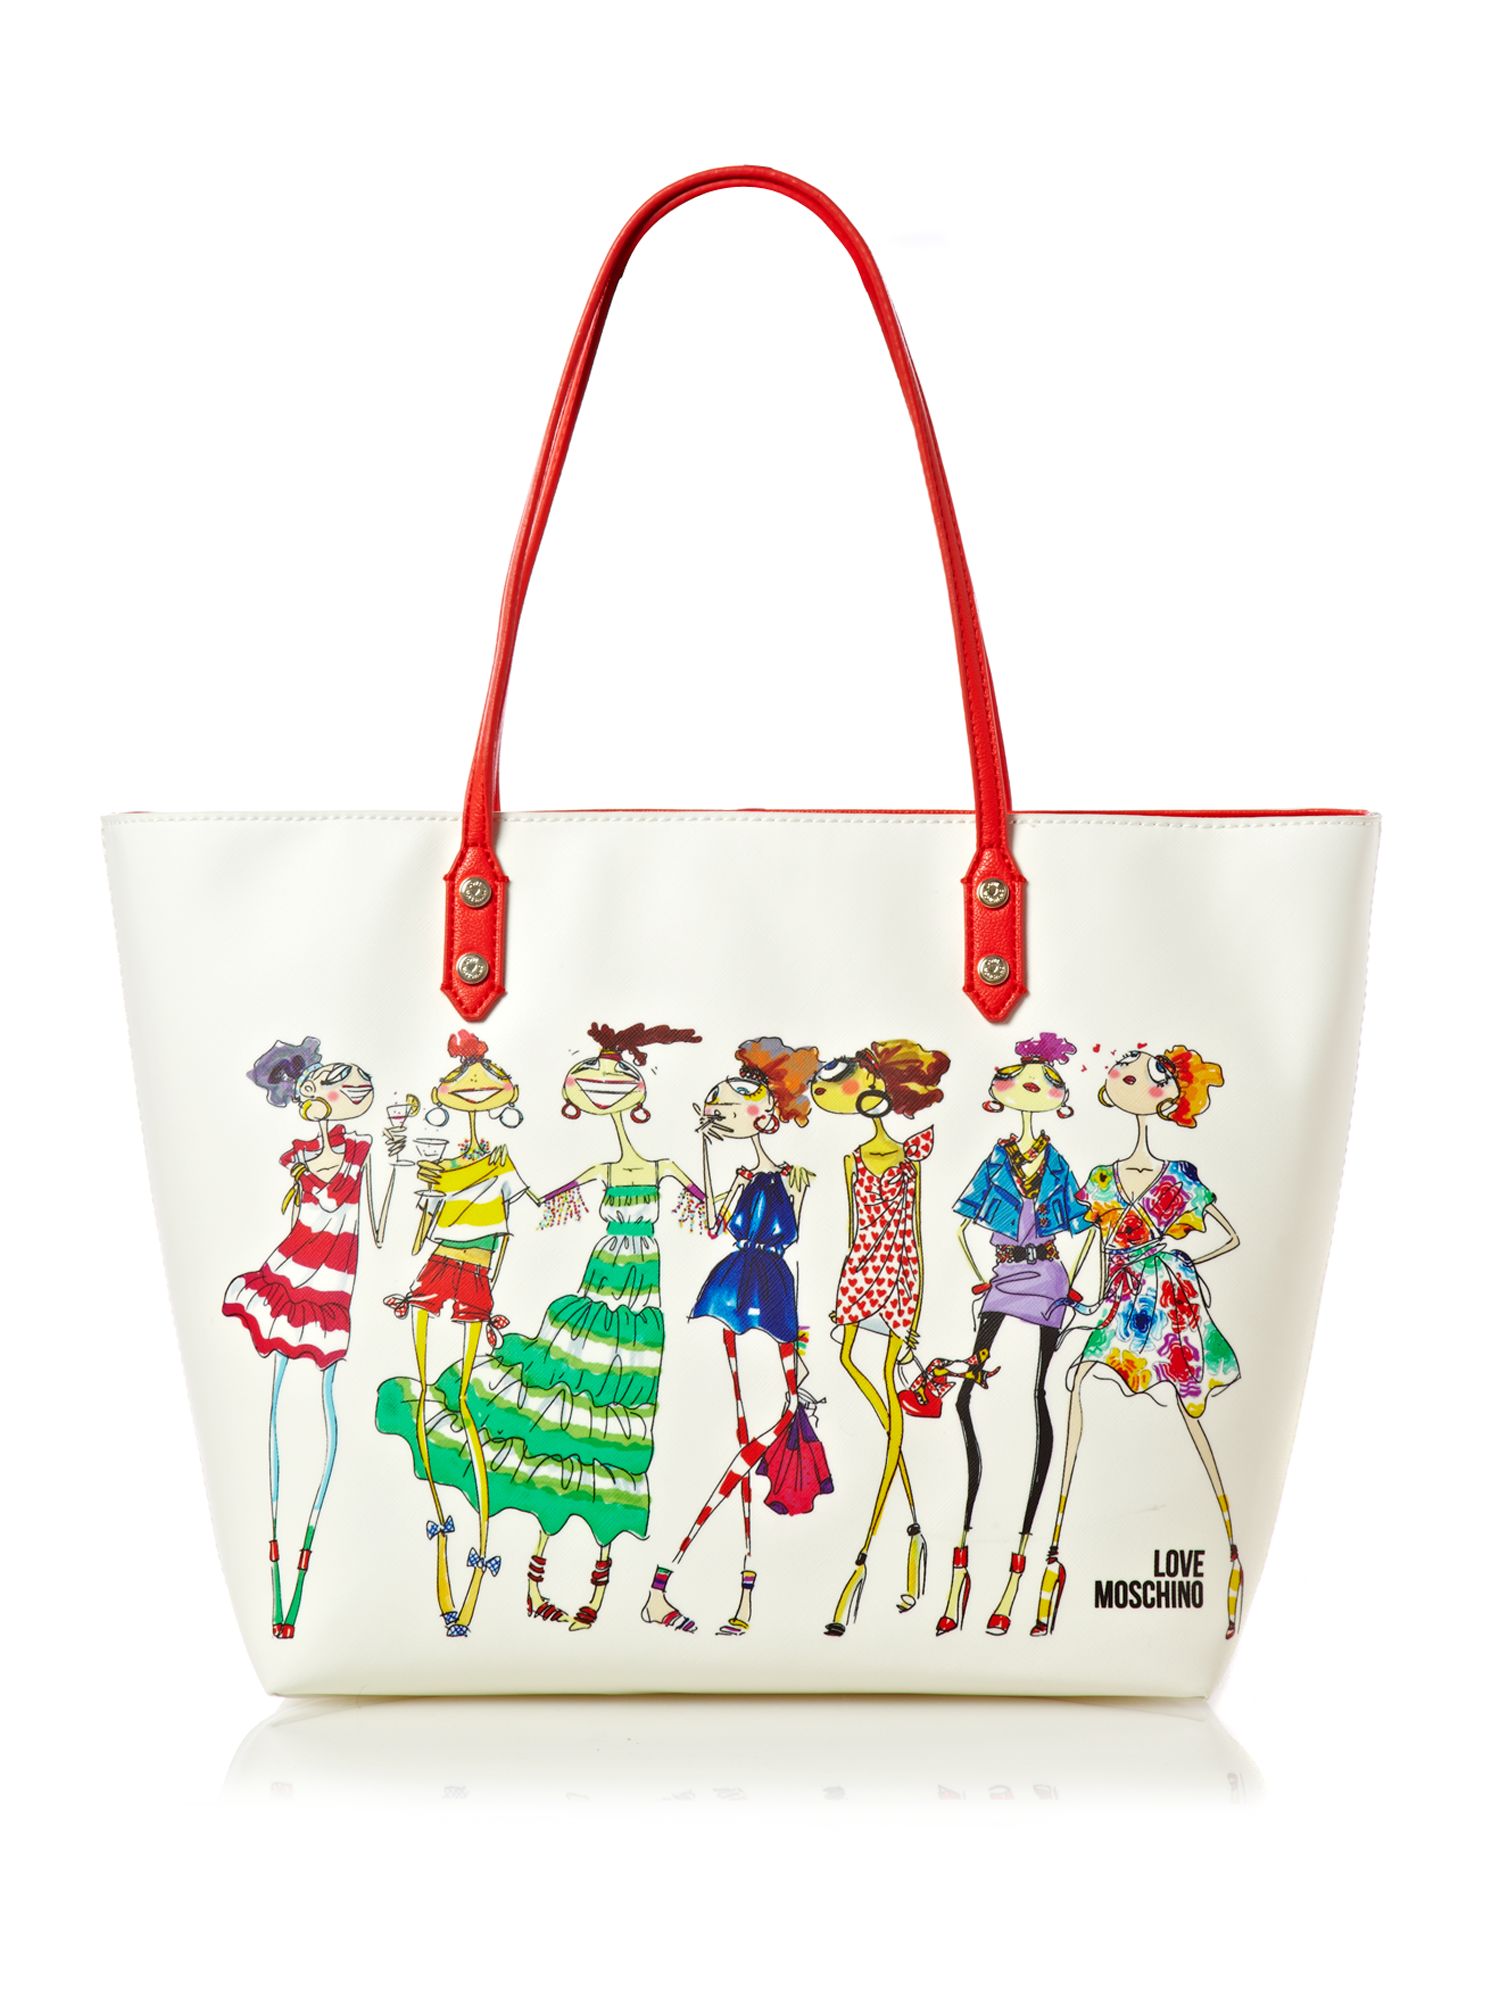 Love Moschino Charming Large Tote Bag in White | Lyst